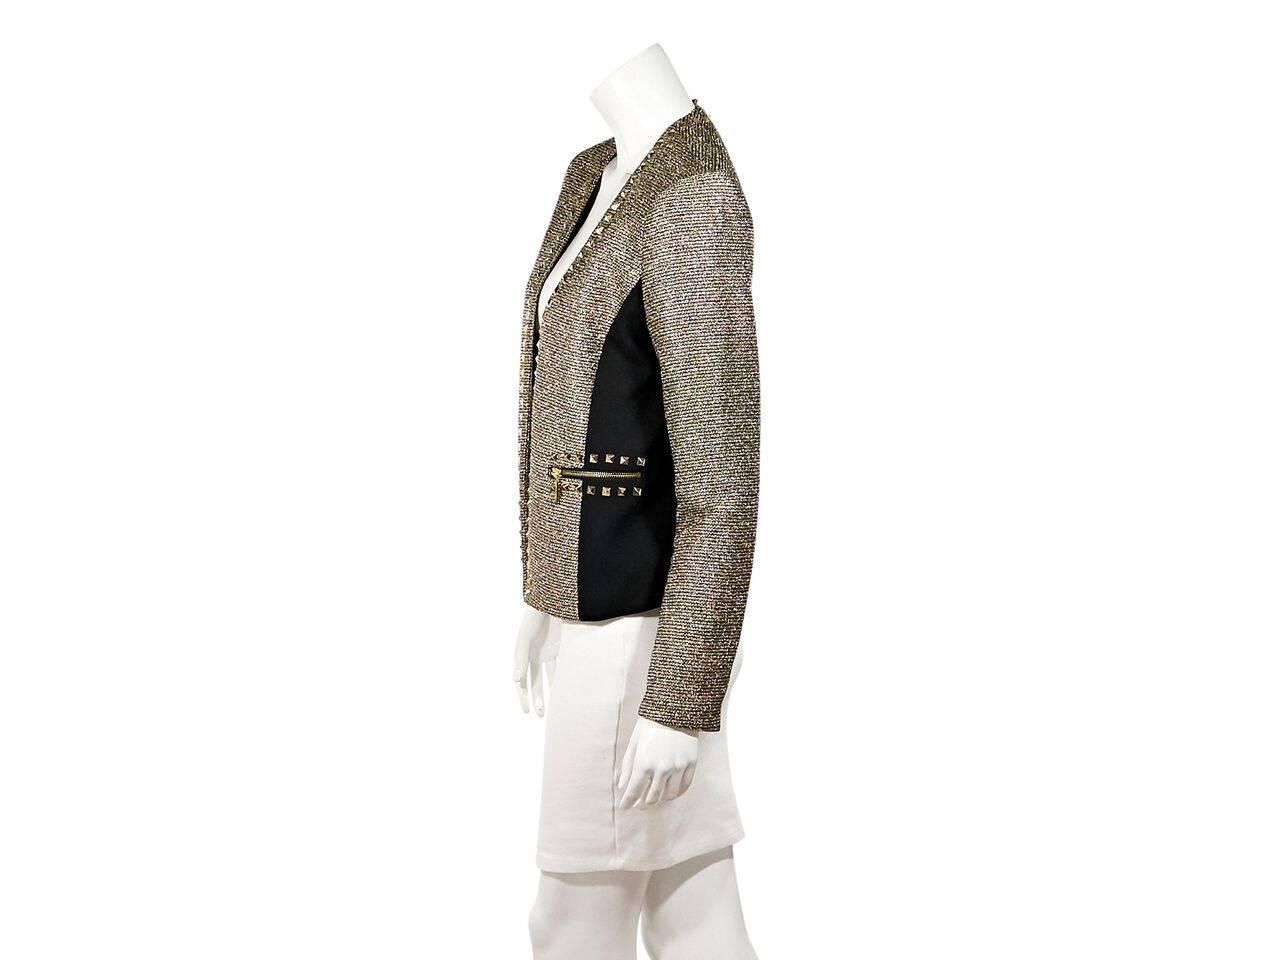 Product details:  Metallic gold and black woven blazer by Michael Michael Kors.  Trimmed with pyramid studs.  Long sleeves.  Open front.  Waist zip pockets.  Goldtone hardware.  
Condition: Pre-owned. Very good.
Est. Retail $ 398.00